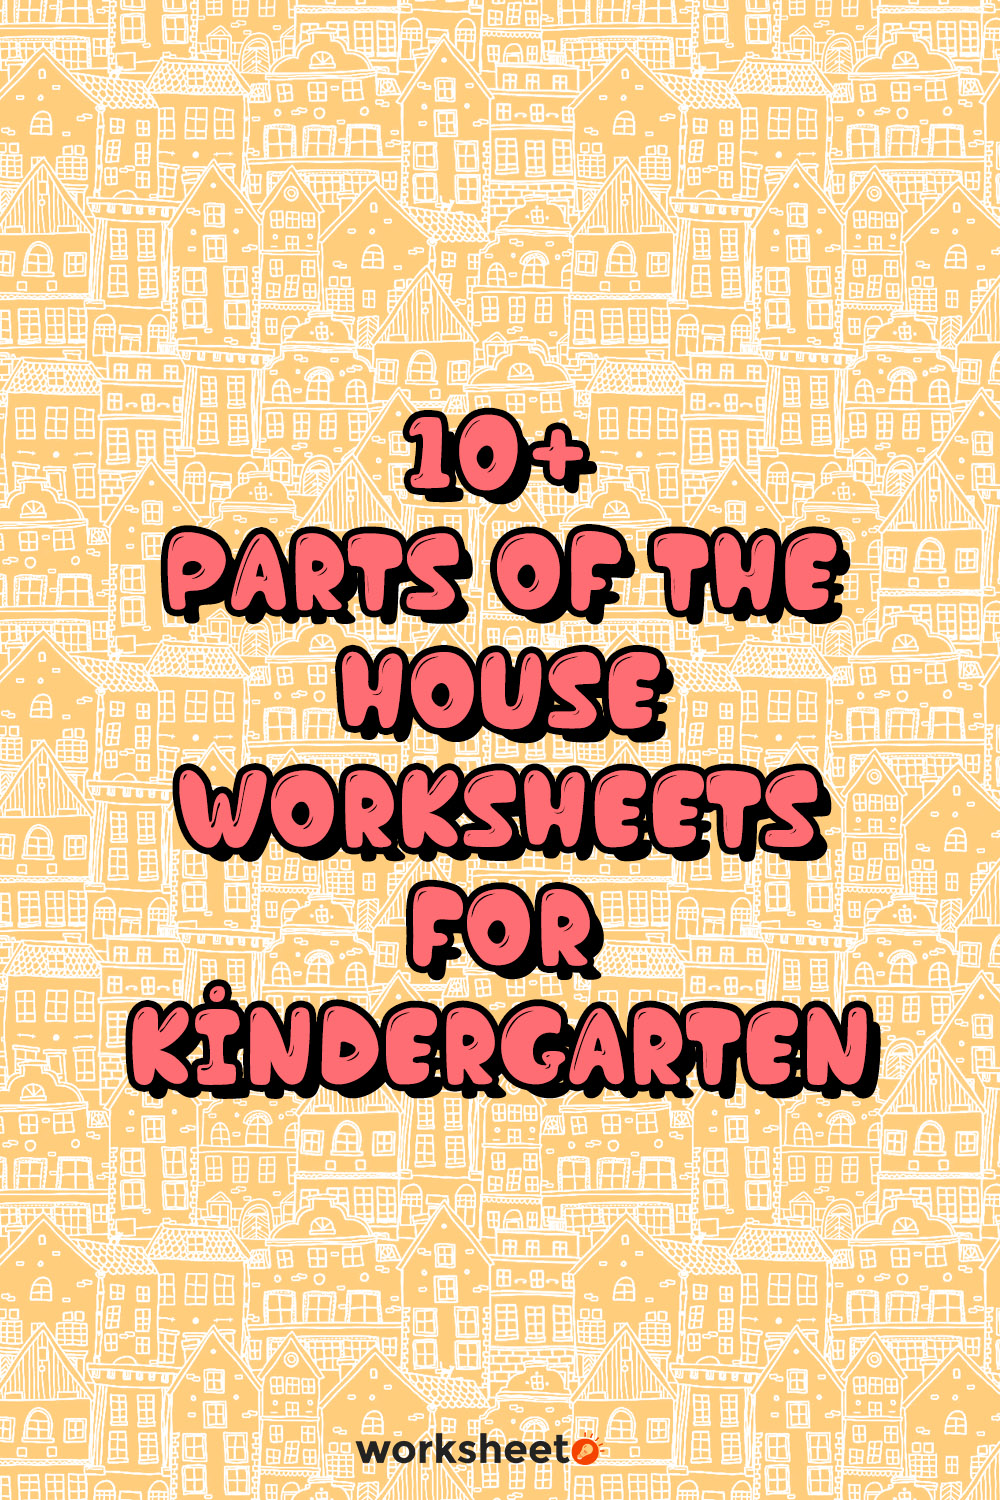 13 Images of Parts Of The House Worksheets For Kindergarten